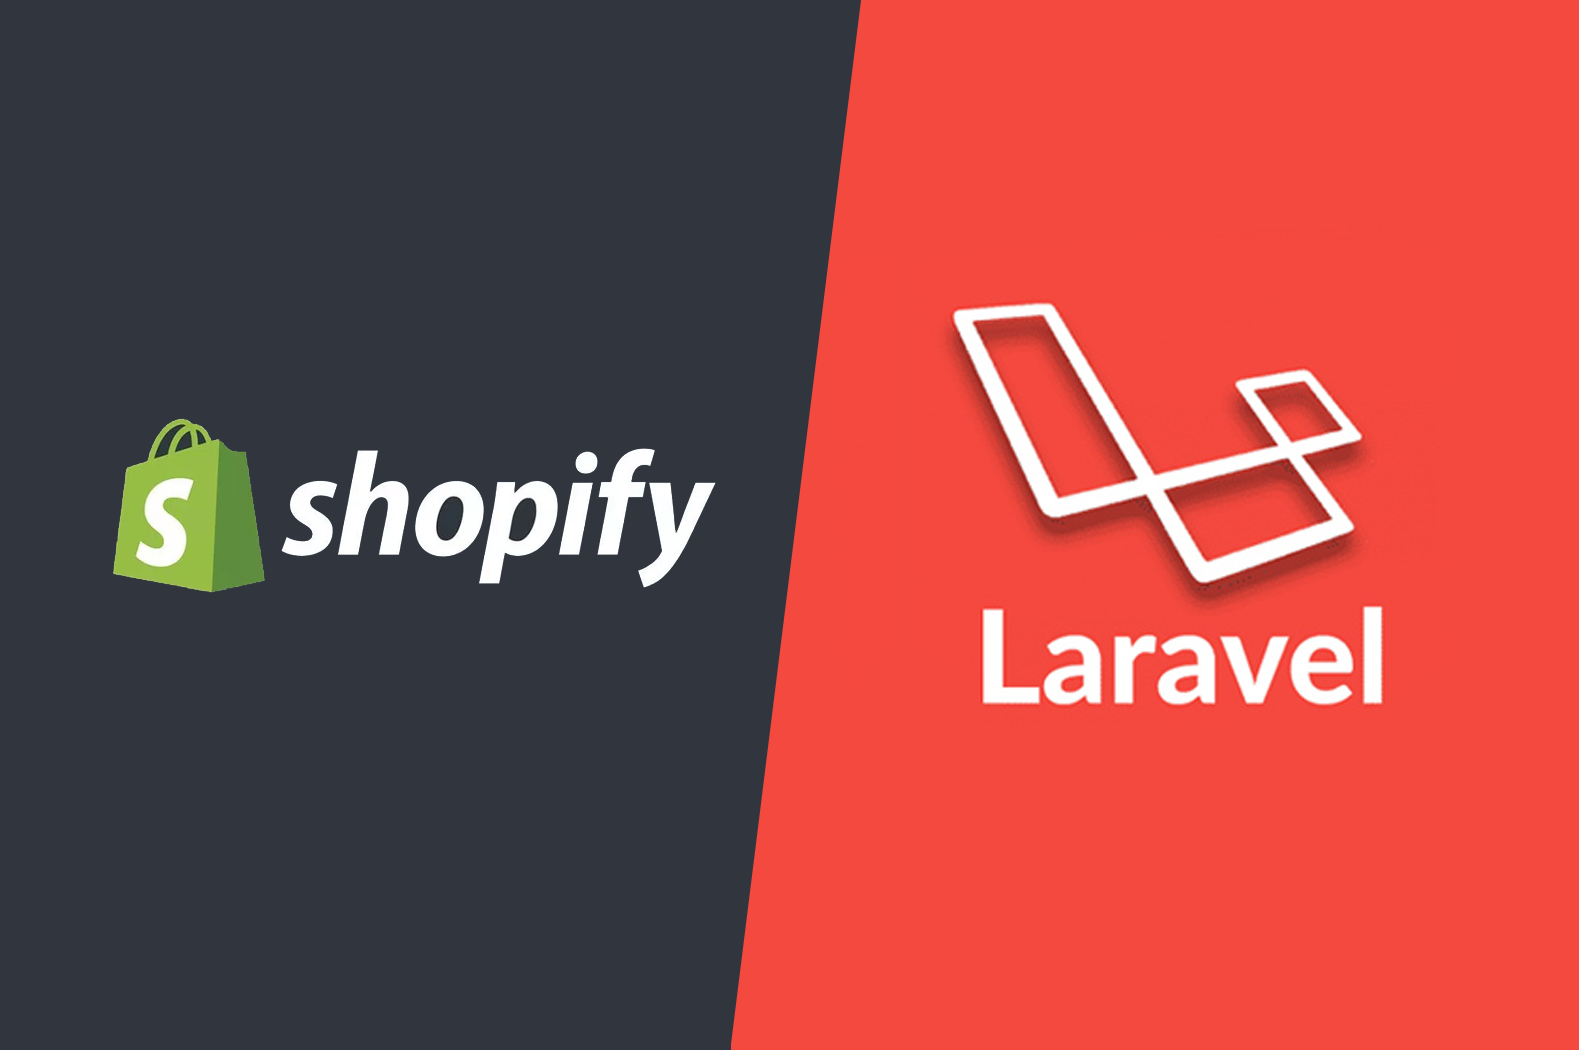 How to Build Shopify Apps with Laravel and PHP (Tutorial)